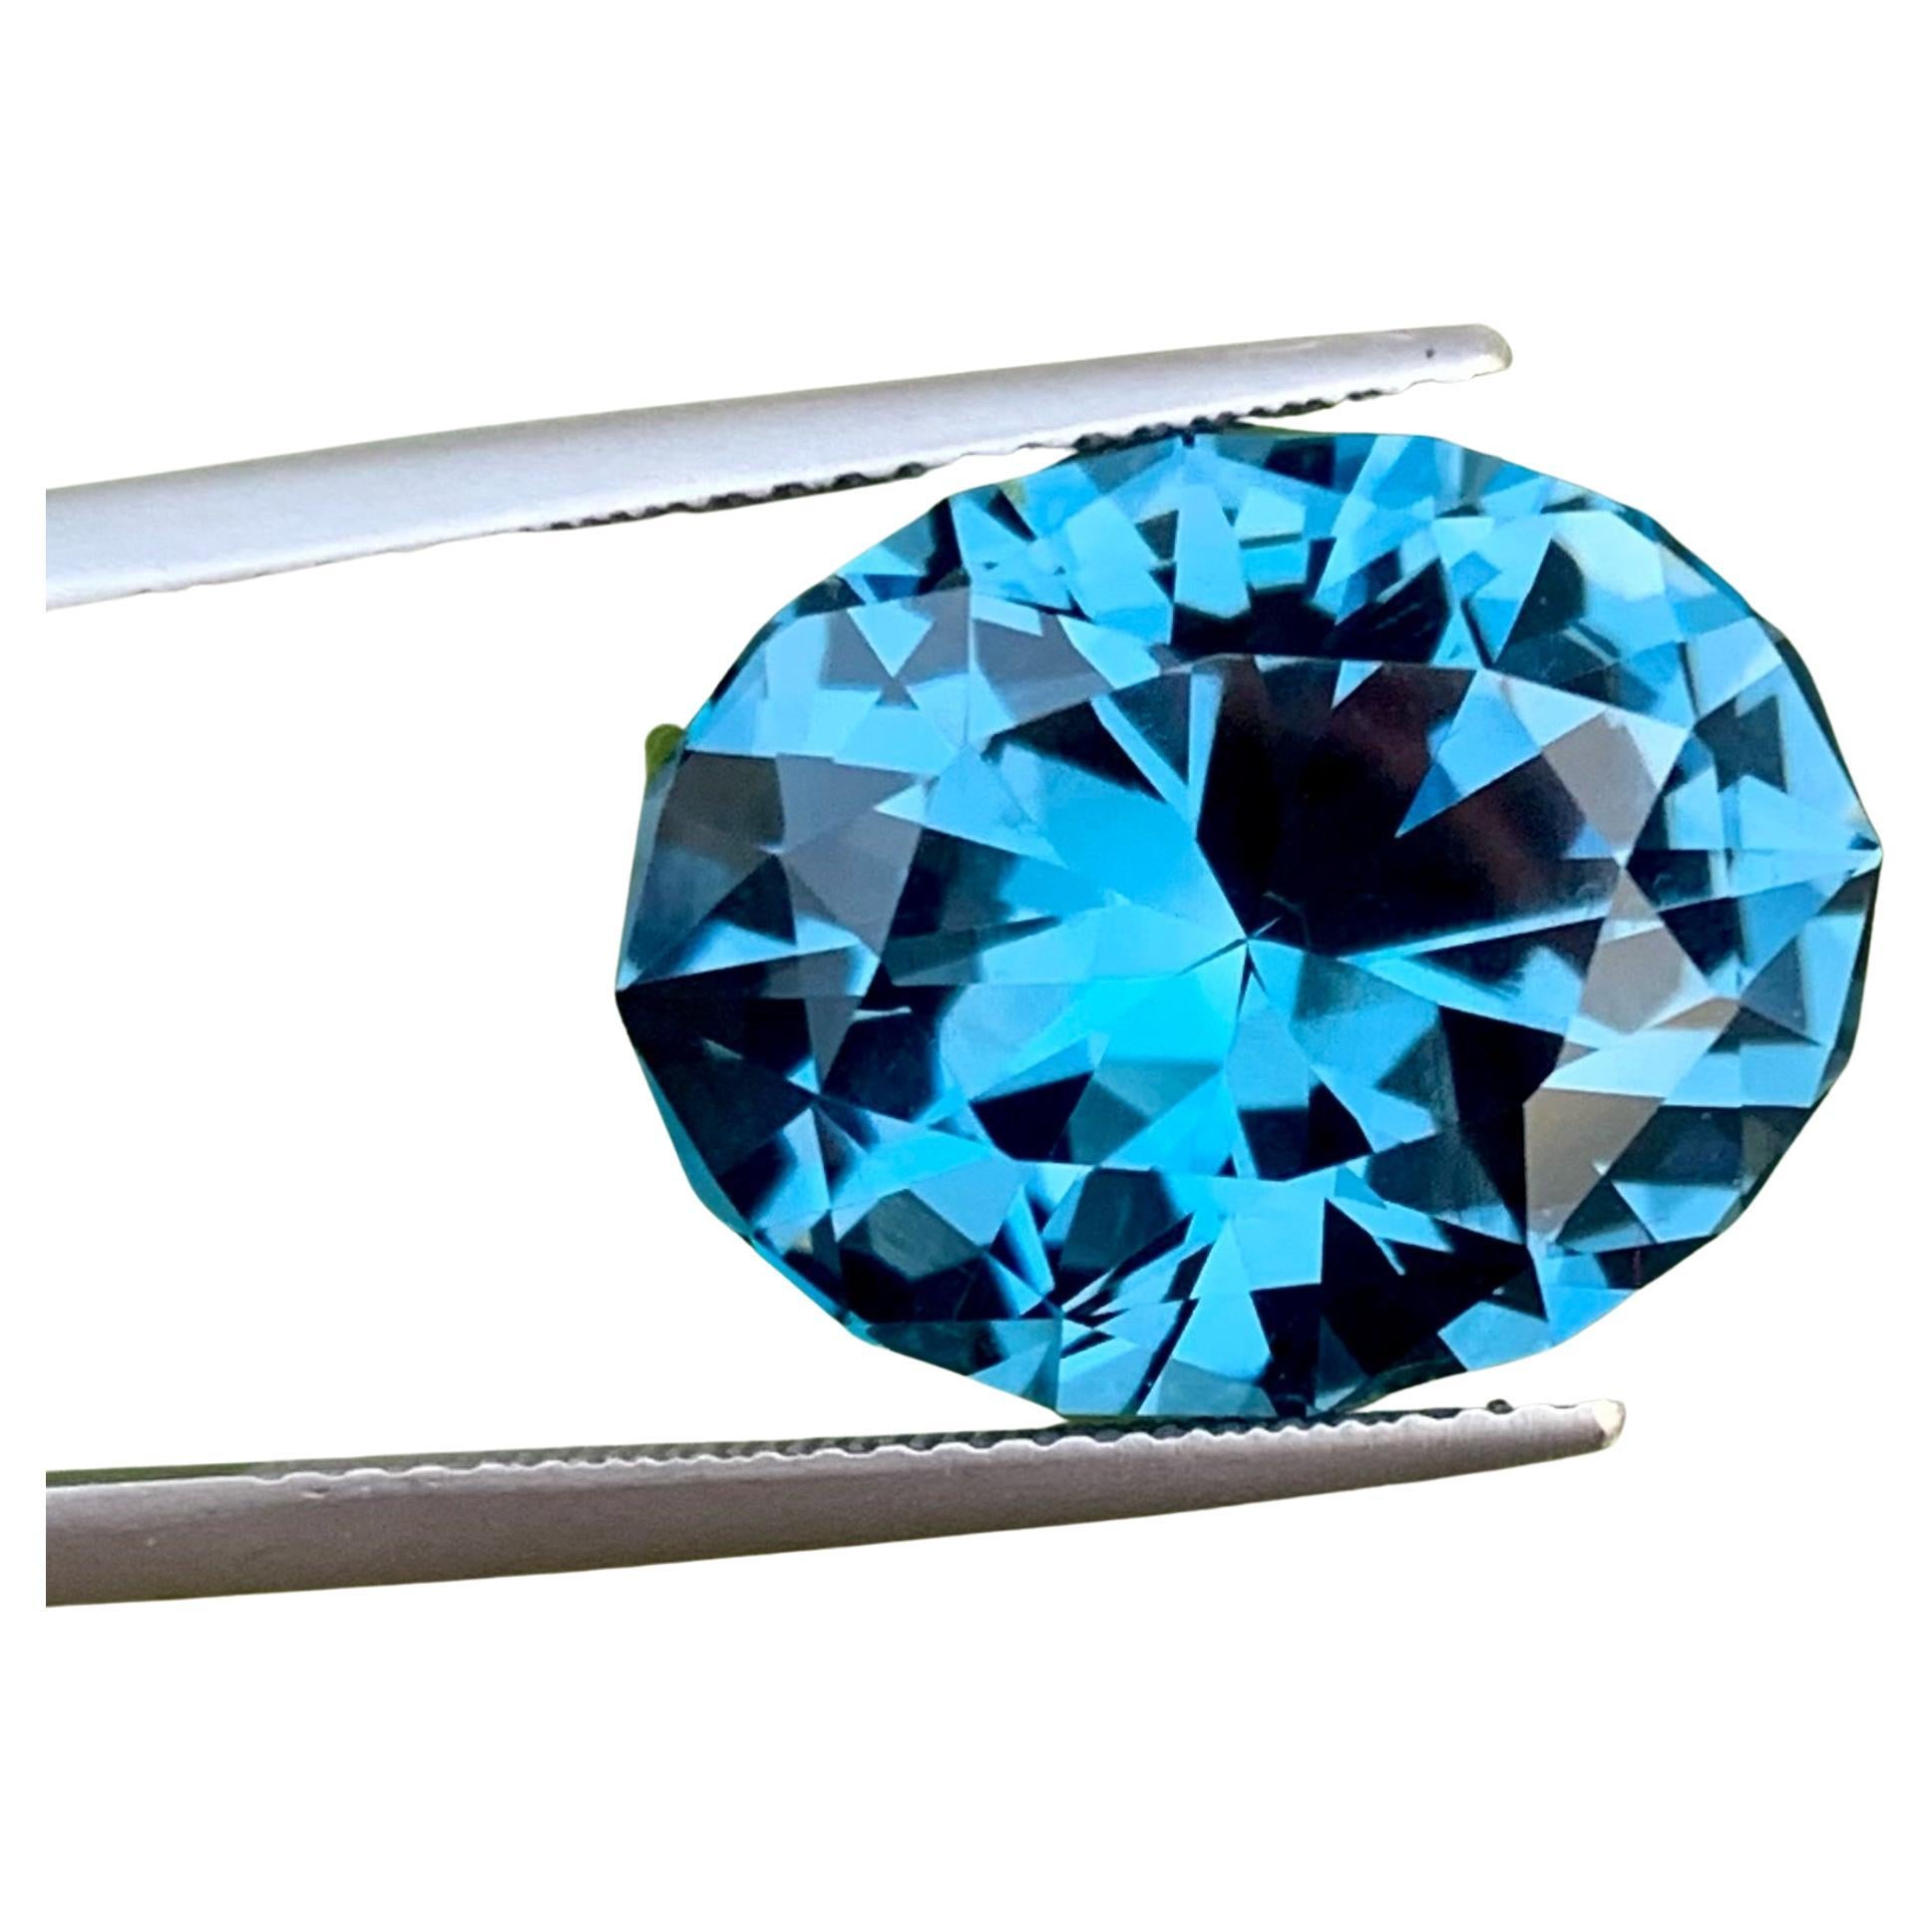 Fascinating Swiss Blue Topaz Stone 17.85 Carats Aaa Sparkling Topaz for Jewelry For Sale